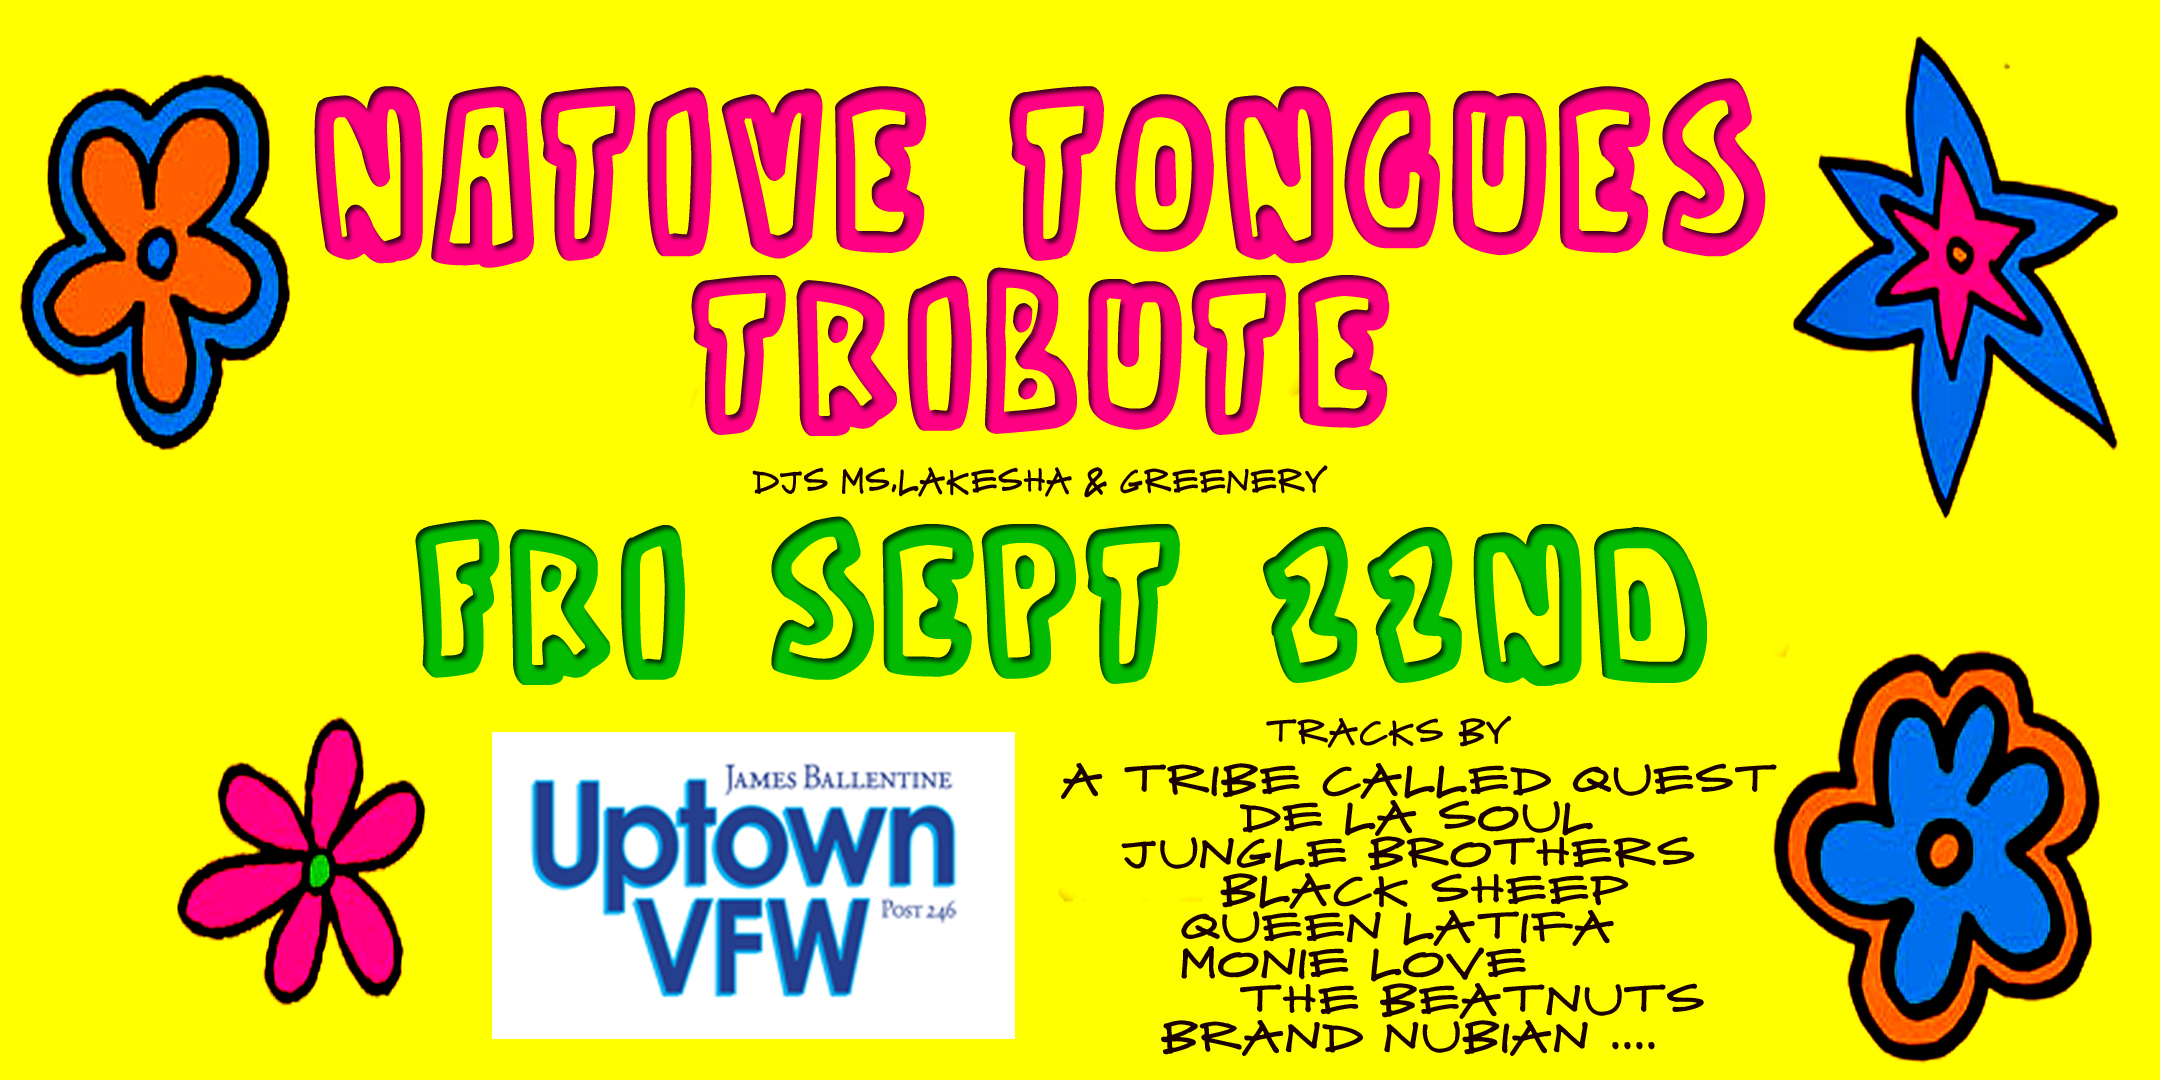 Native Tongues Tribute DJs Ms. Lakesha & Greenery Tracks by.. A Tribe Called Quest, De La Soul, Jungle Brothers, Black Sheep, Queen Latifa, Monie Love, The Beatnuts, Brand Nubian & more Friday September 22 James Ballentine "Uptown" VFW Post 246 2916 Lyndale Ave S. Doors 10:00pm :: Music 10:00pm :: 21+ GA $5 ADV / $10 DOS Tickets On Sale Now